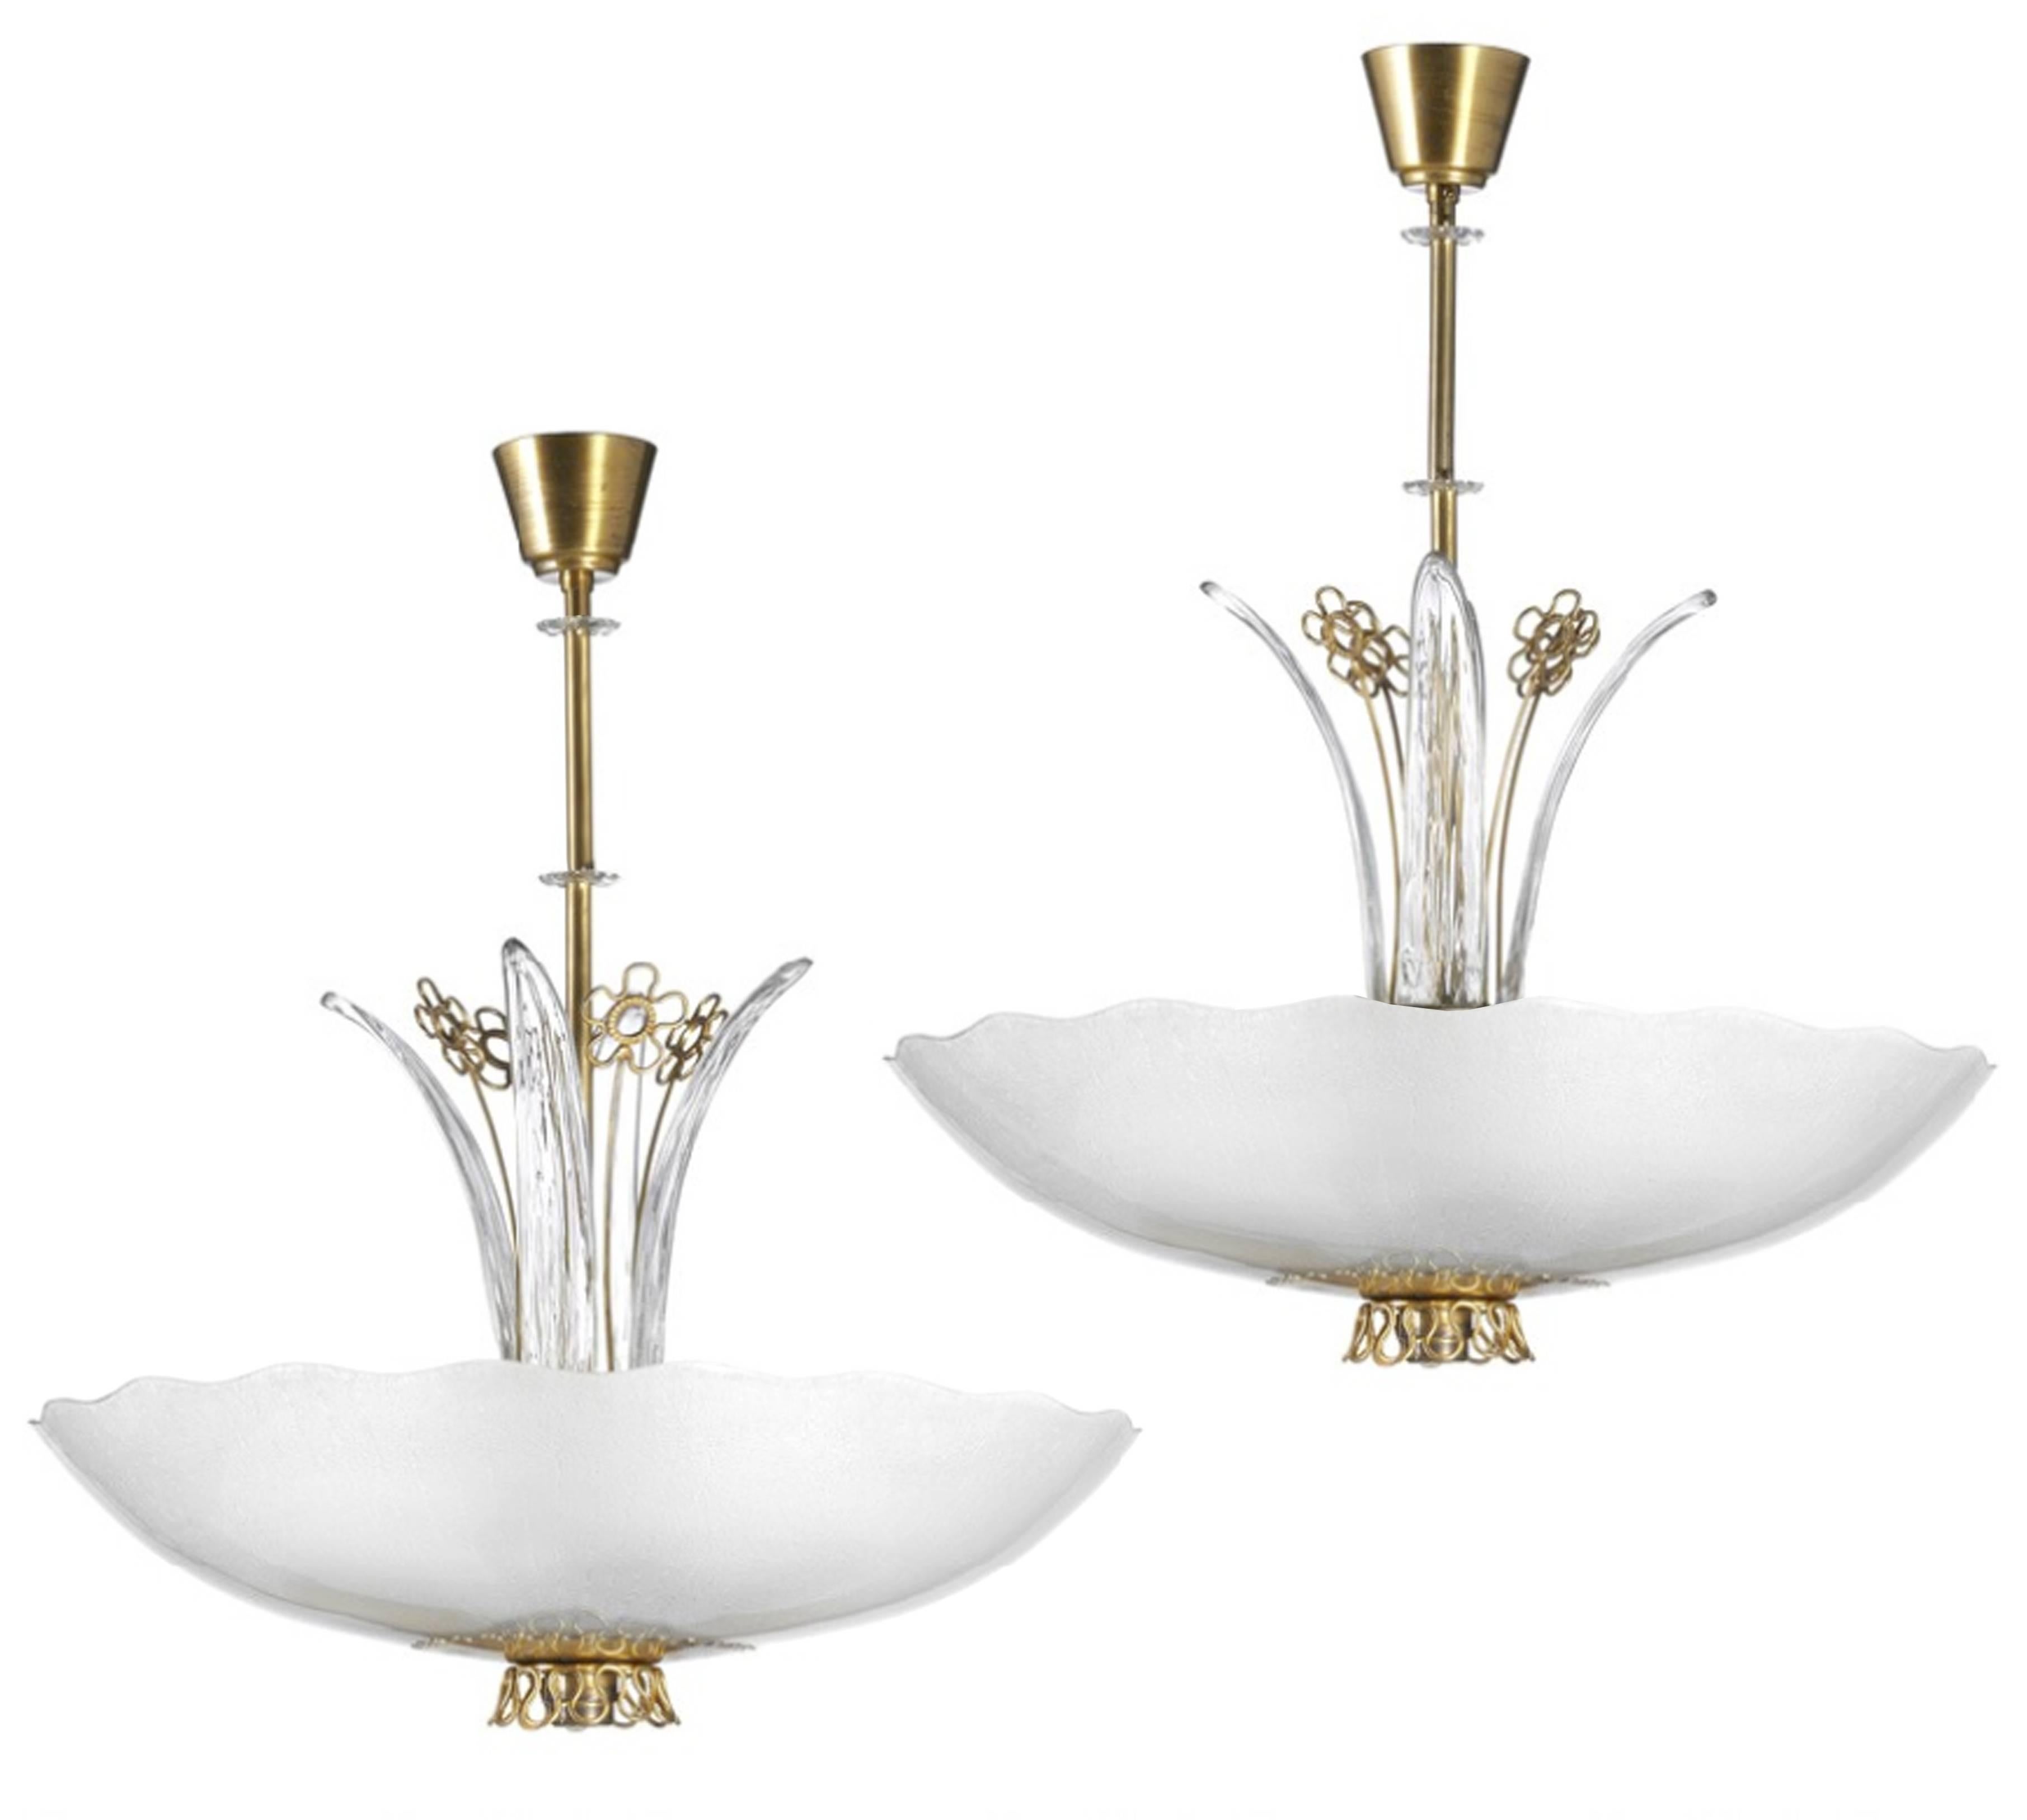 A pair of glass chandeliers with scallop edges and decorative brass and glass details by Orrefors.

Swedish, Circa 1940's